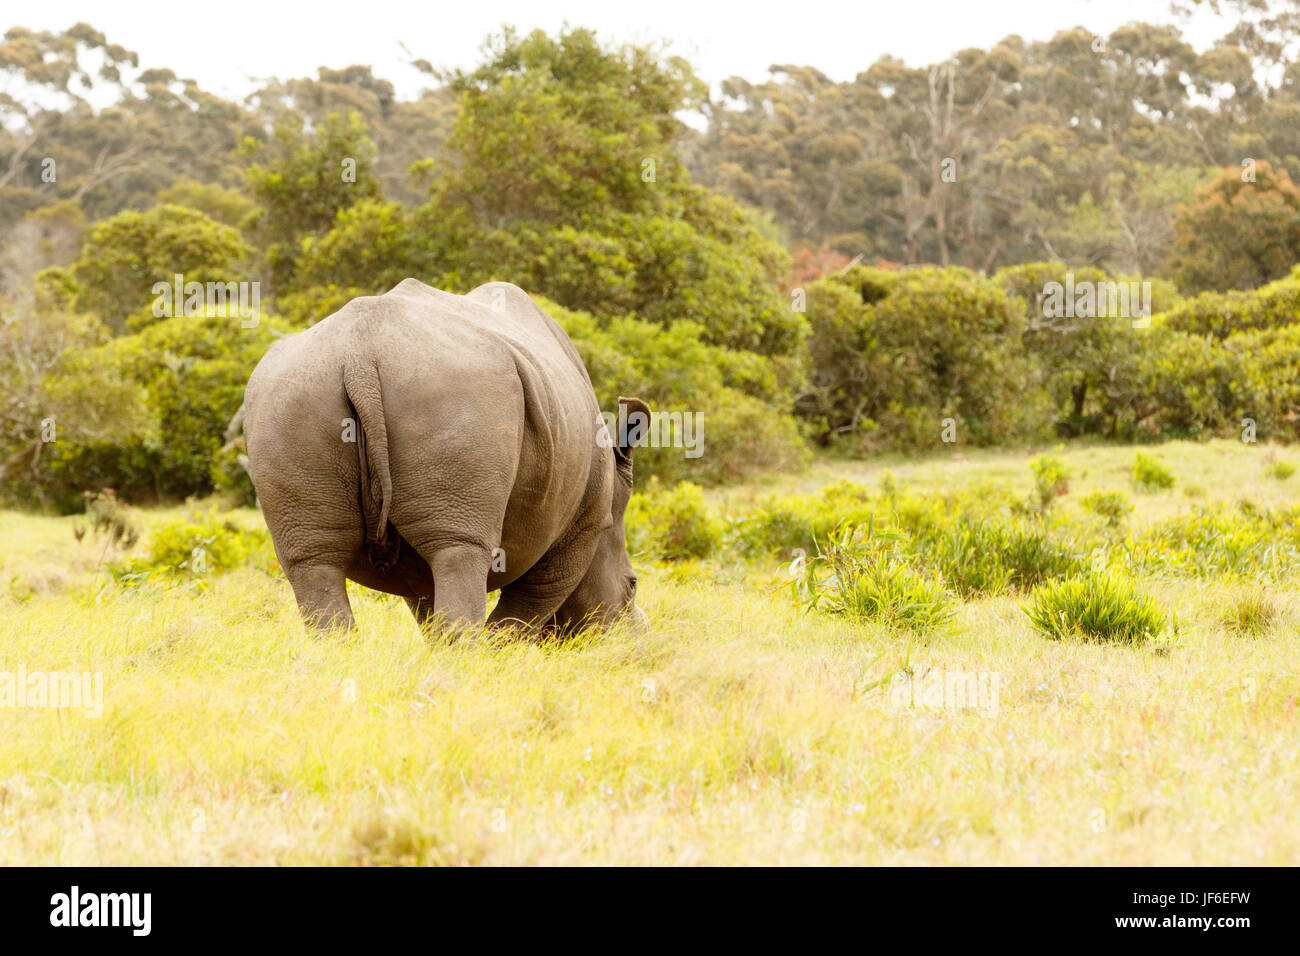 The backside of a rhino eating grass Stock Photo